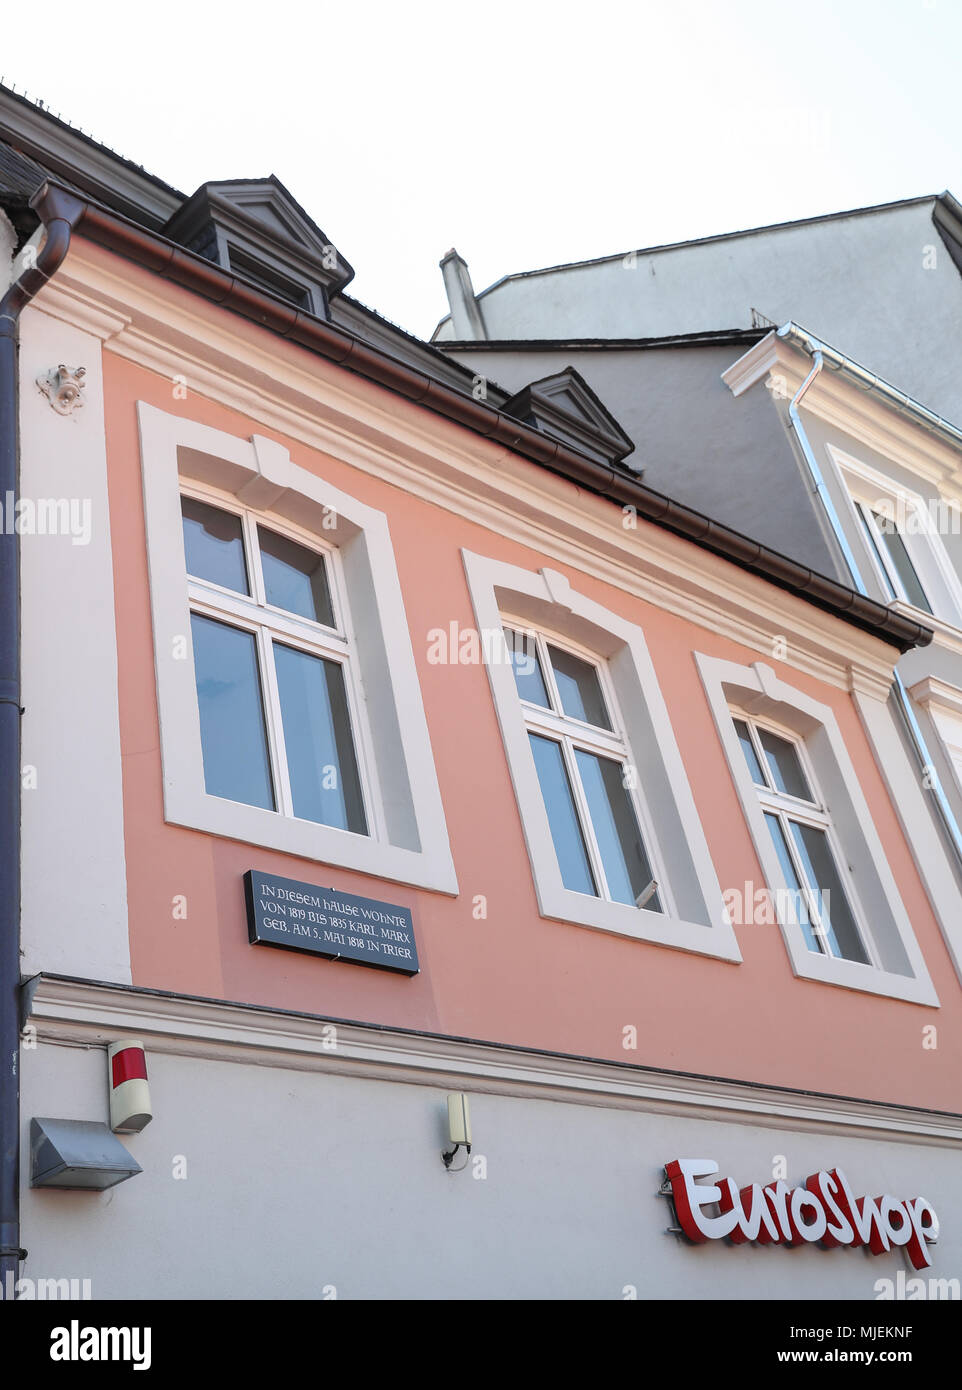 Trier, Karl Marx lived from 1819 to 1835 in Trier. 5th May, 2018. Photo taken on May 4, 2018 shows a residence where Karl Marx lived from 1819 to 1835 in Trier, Germany. The 200th anniversary of Karl Marx's birth falls on May 5, 2018. Credit: Shan Yuqi/Xinhua/Alamy Live News Stock Photo